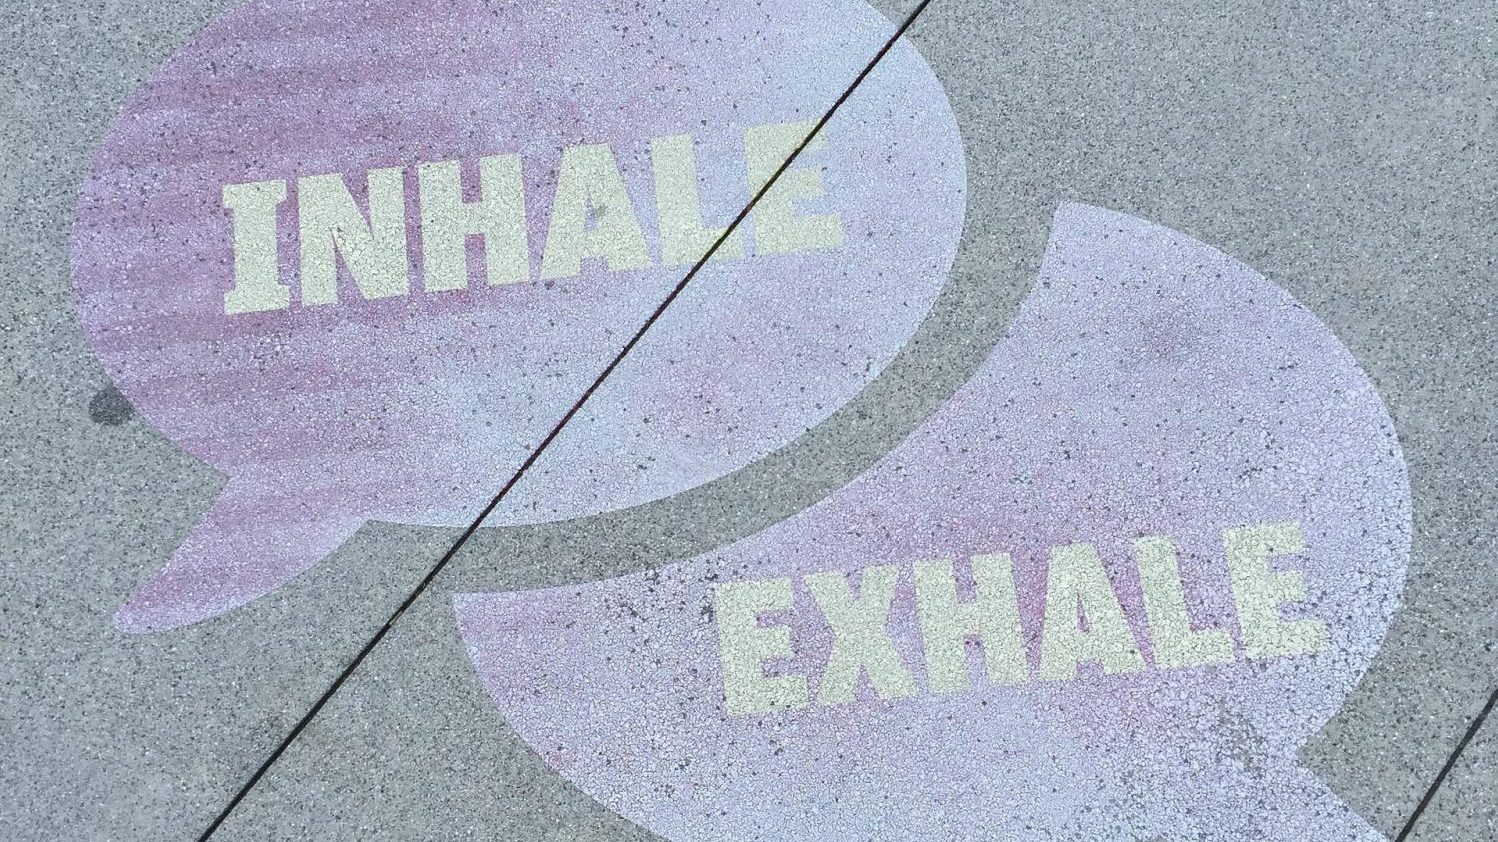 Street art says inhale and exhale. Breathing exercises for long covid